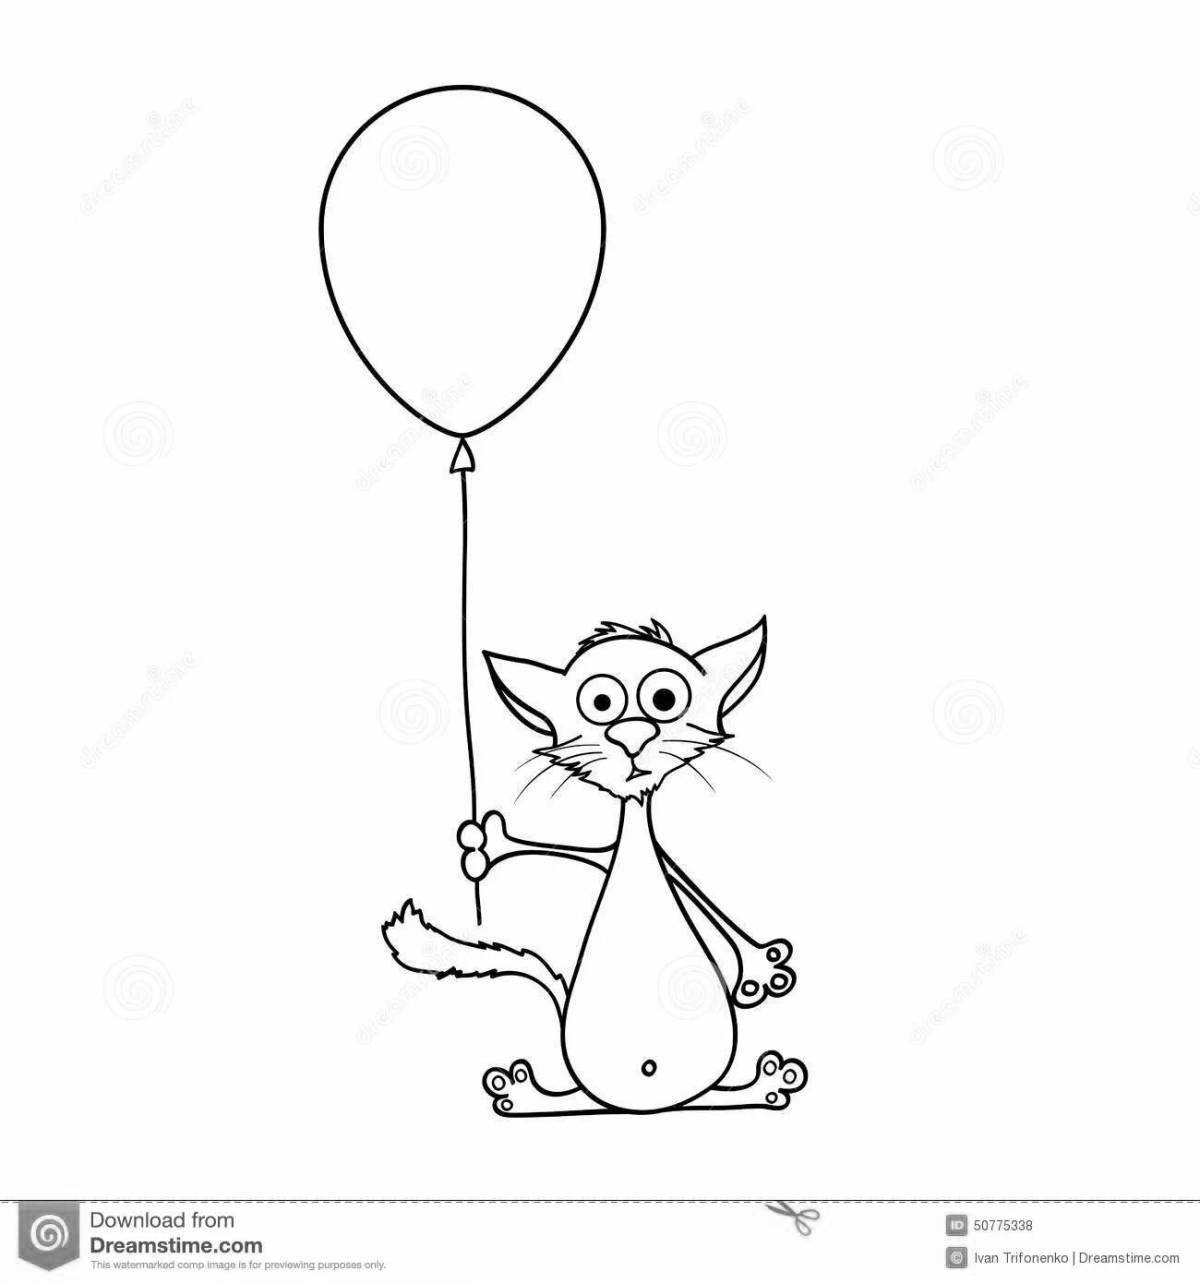 Grinning cat with balloons